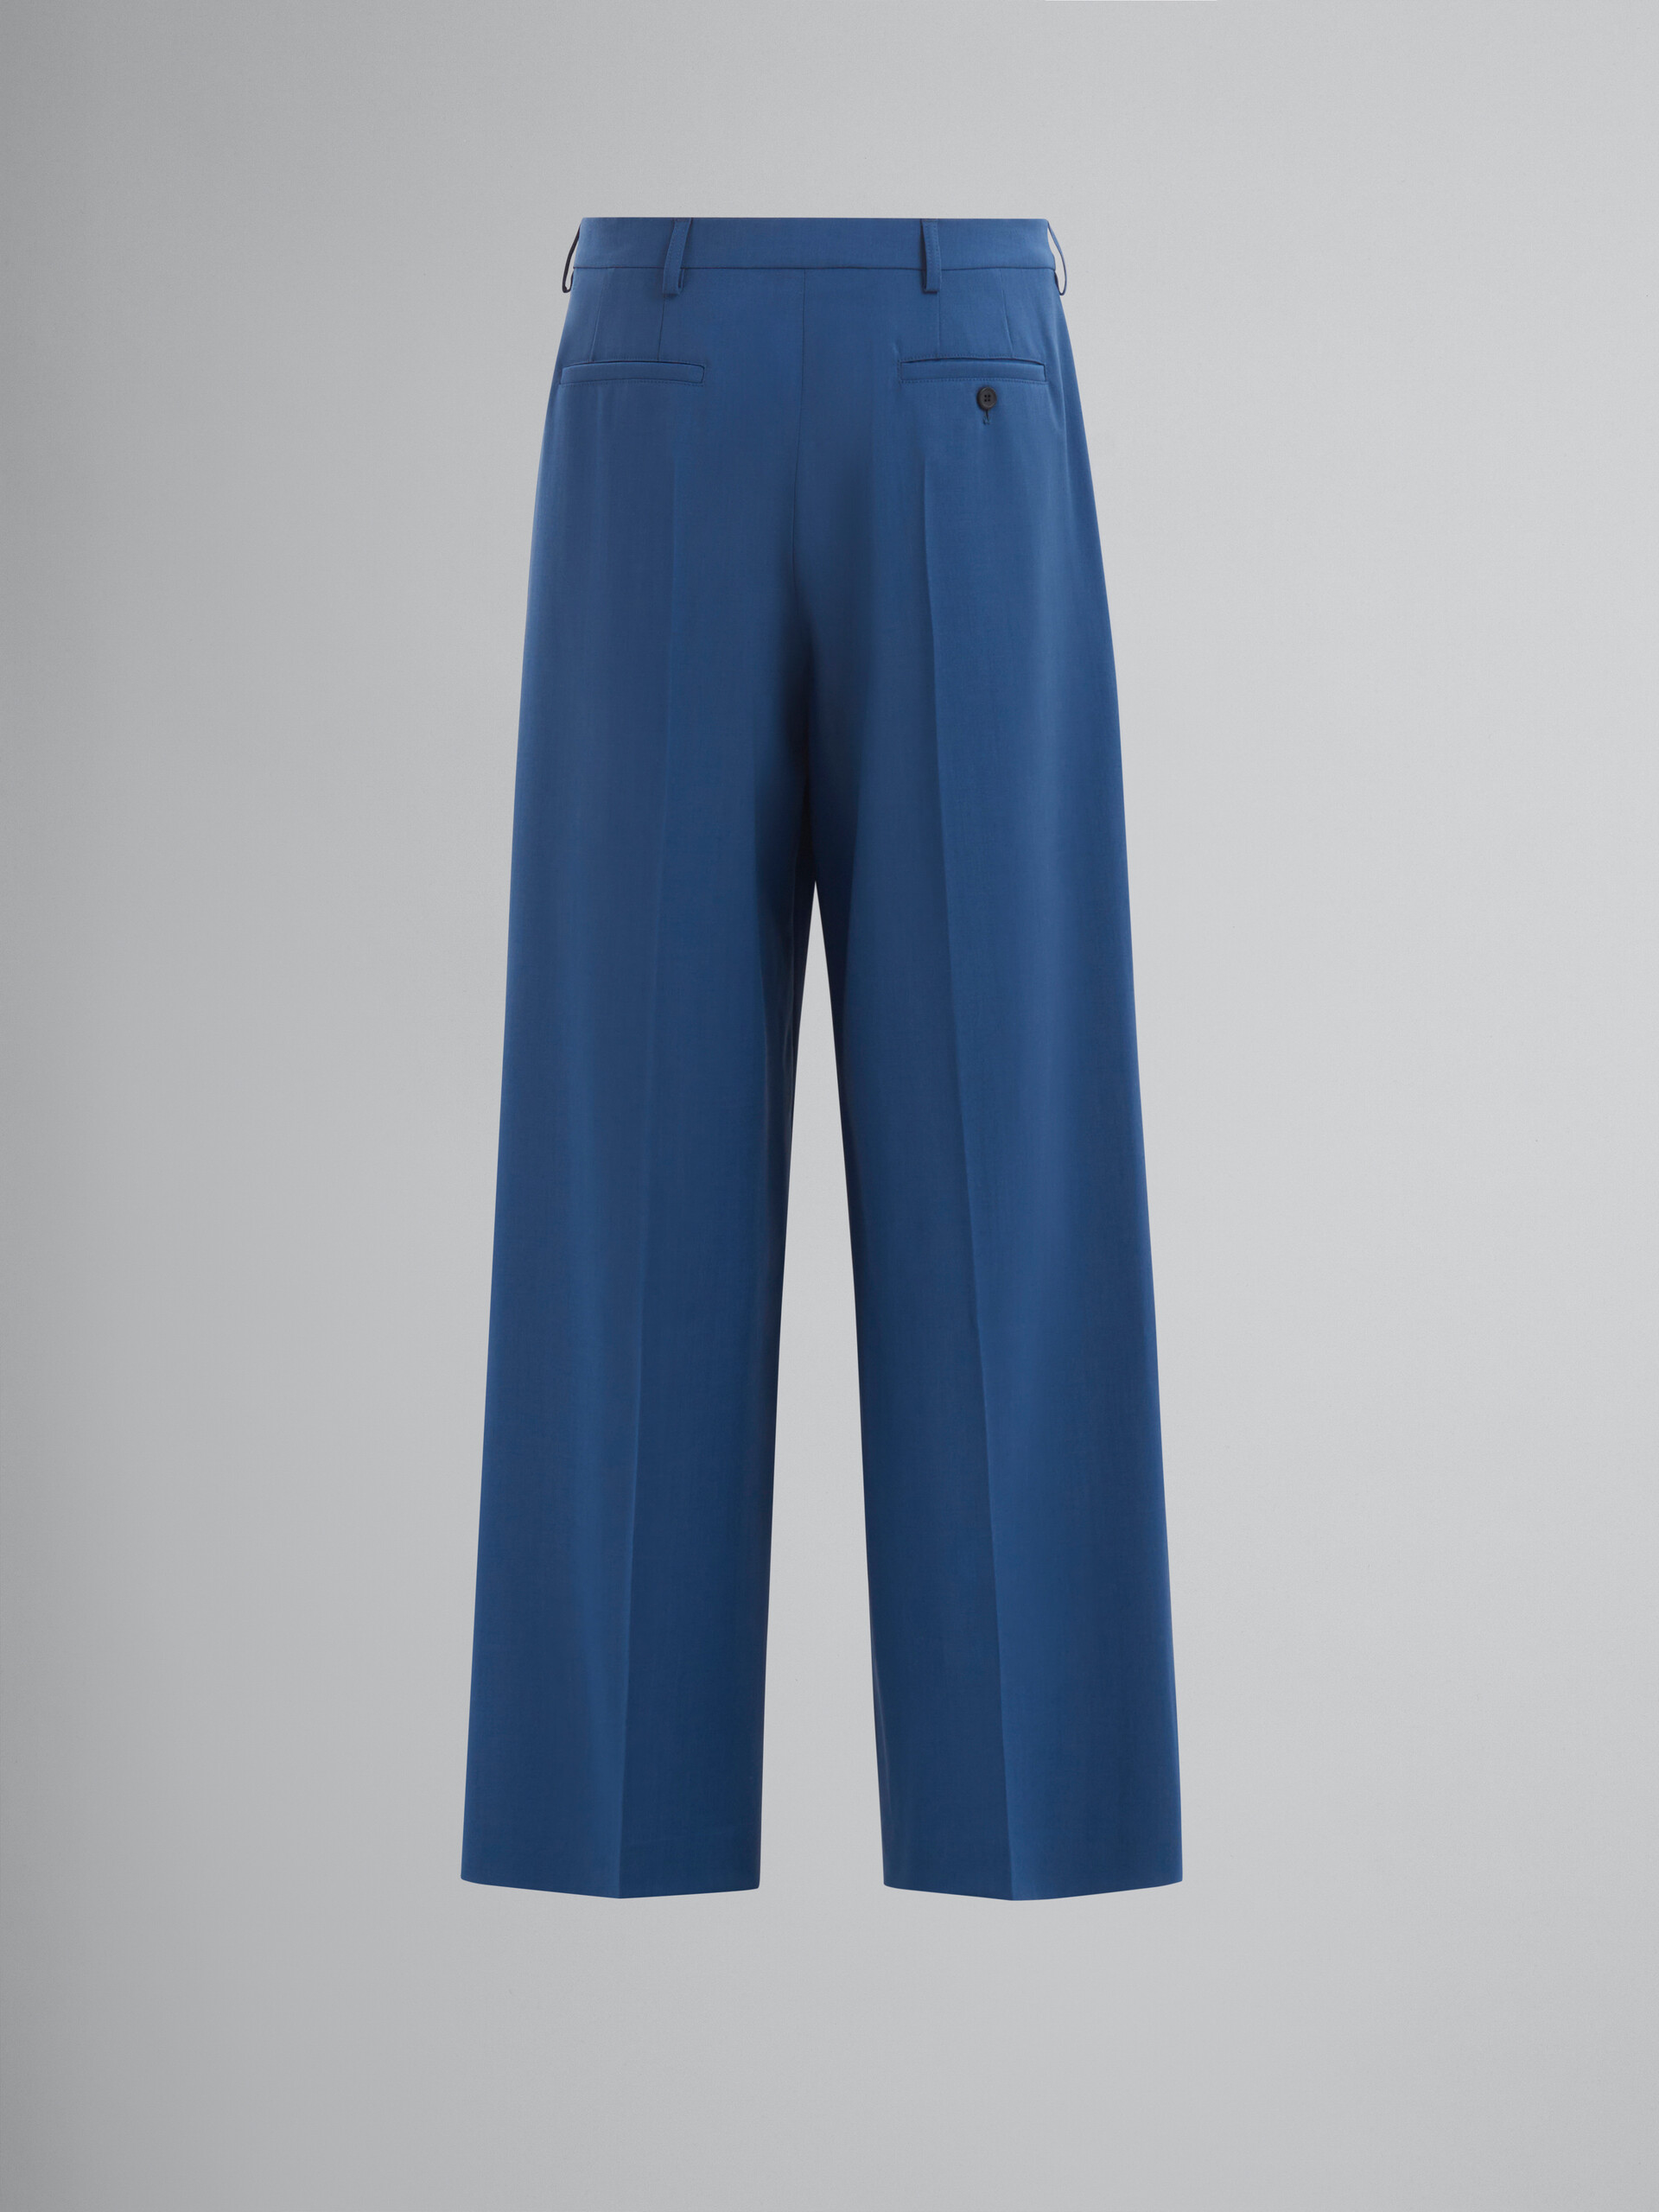 Blue wool-mohair trousers with pleats - Pants - Image 2